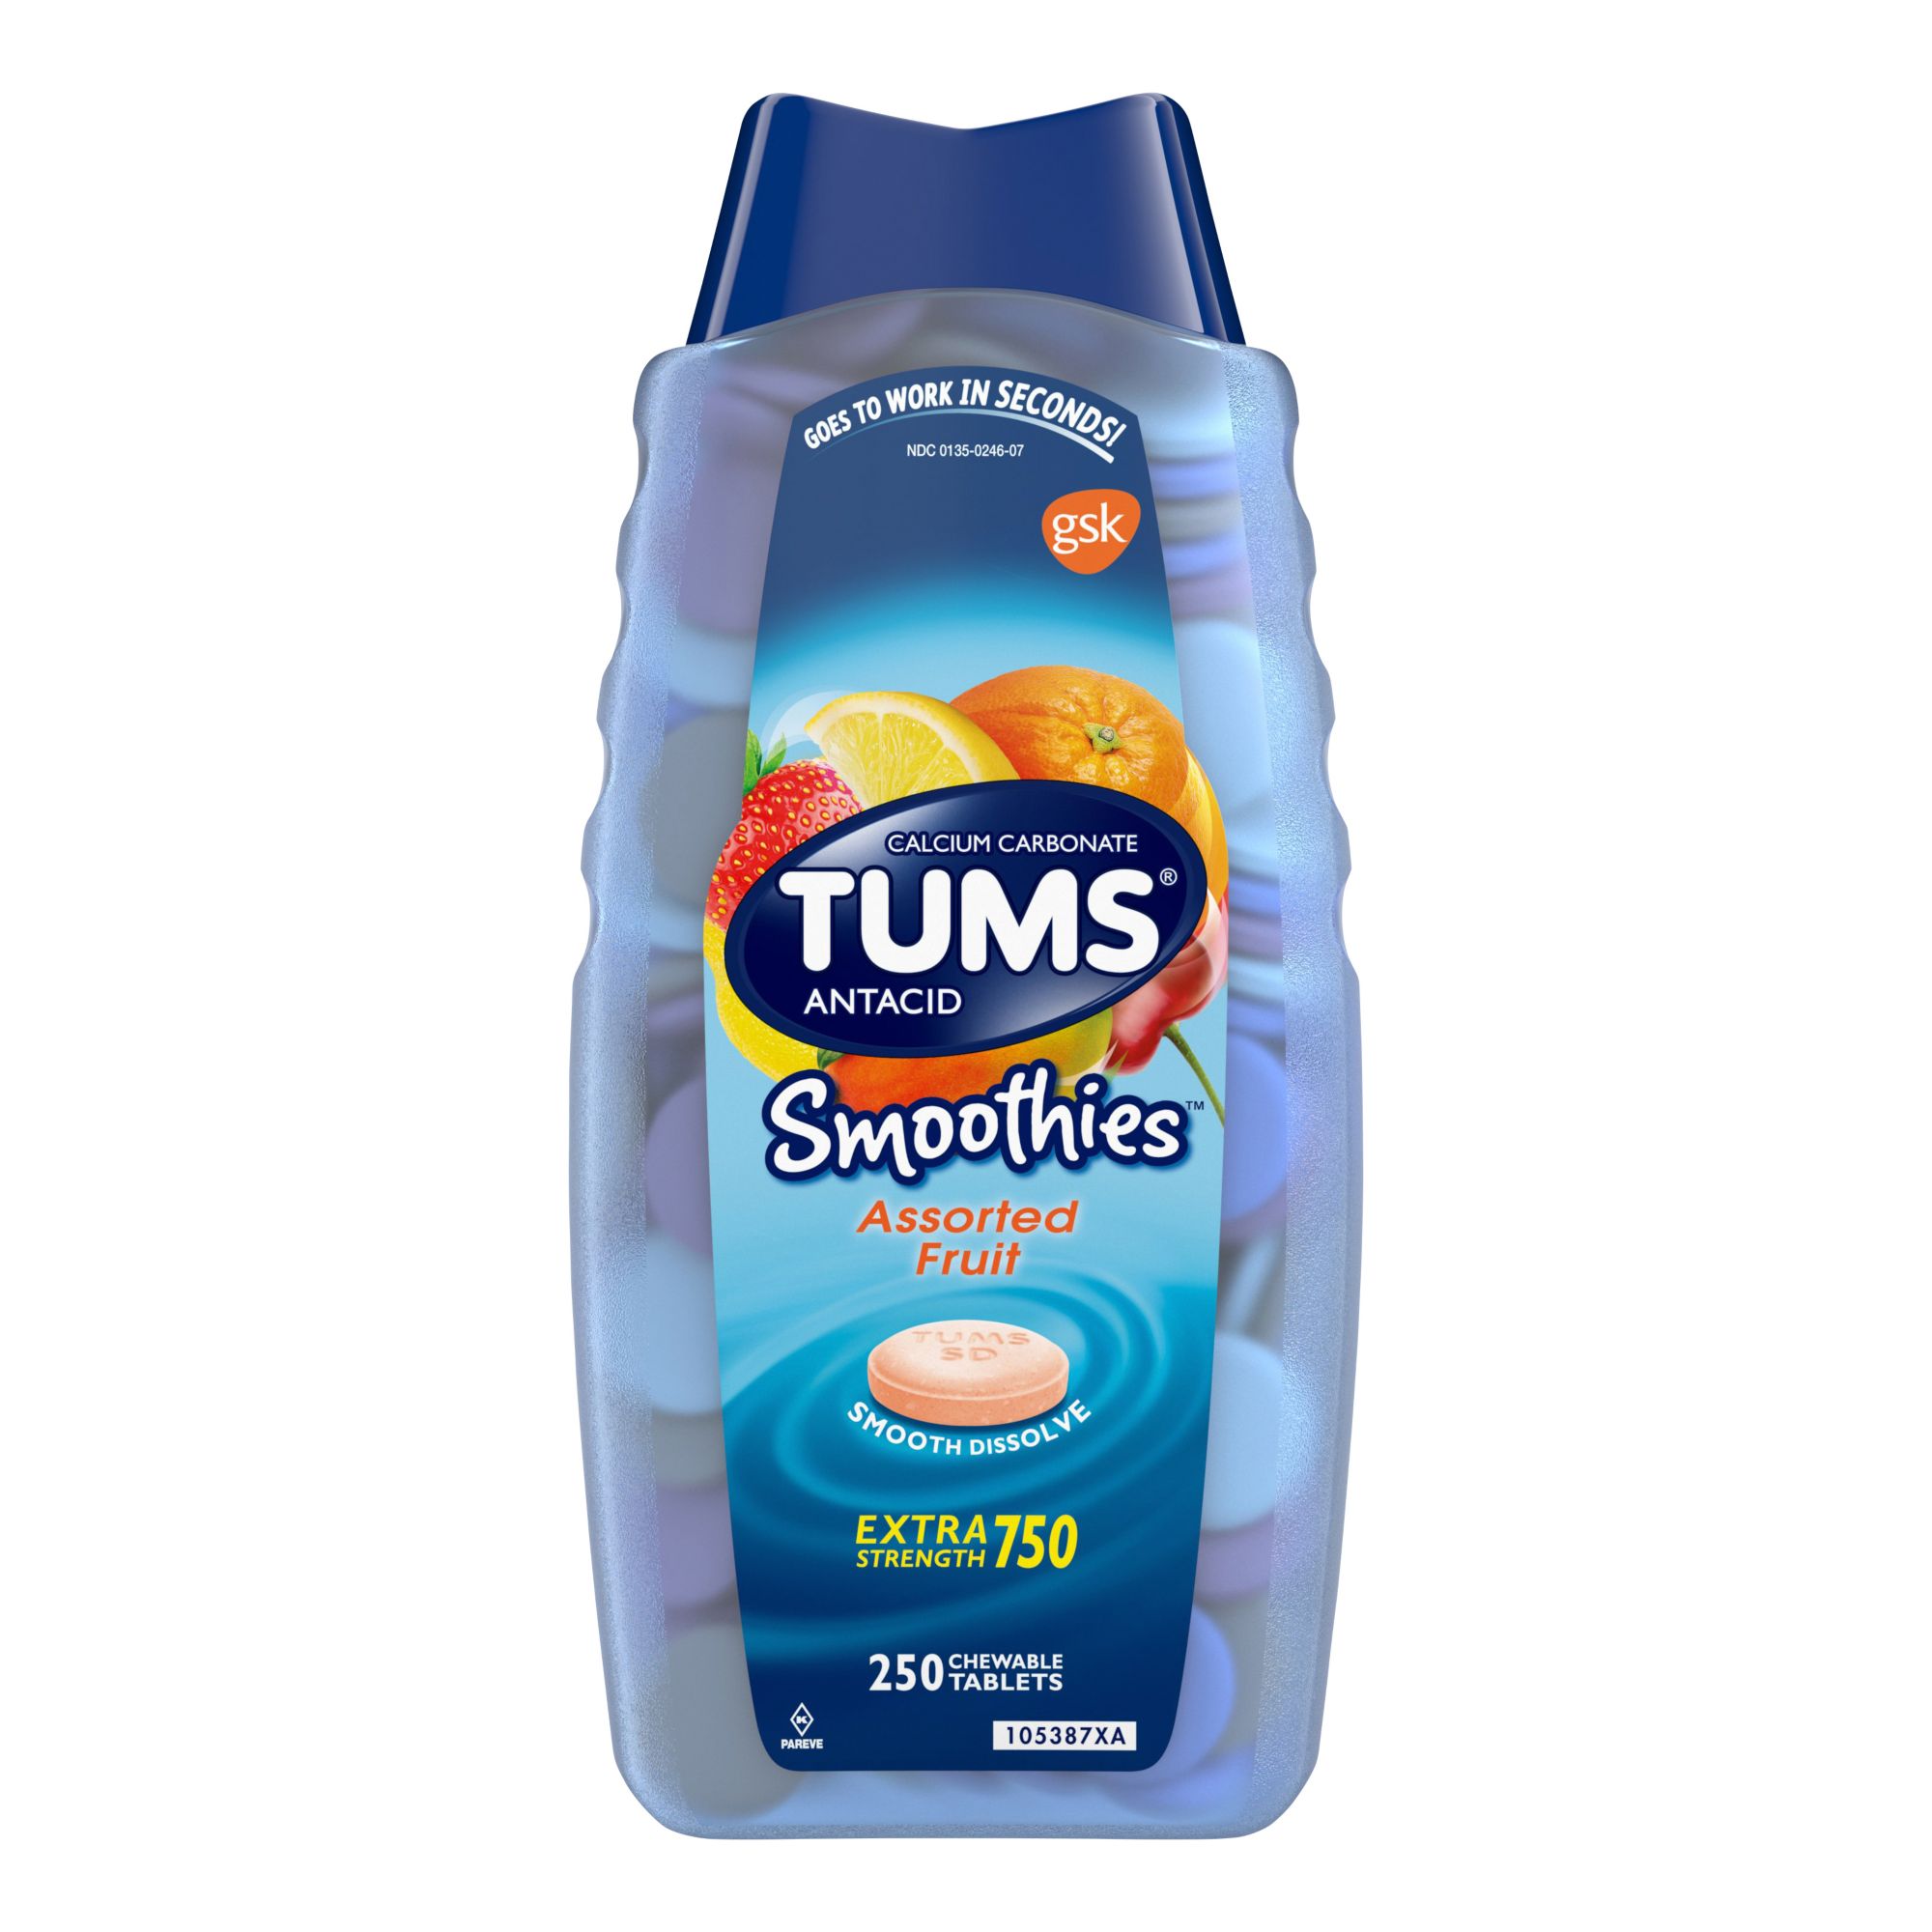 Tums Smoothies Assorted Fruit Flavor Chewable Tablets, 250 ct.